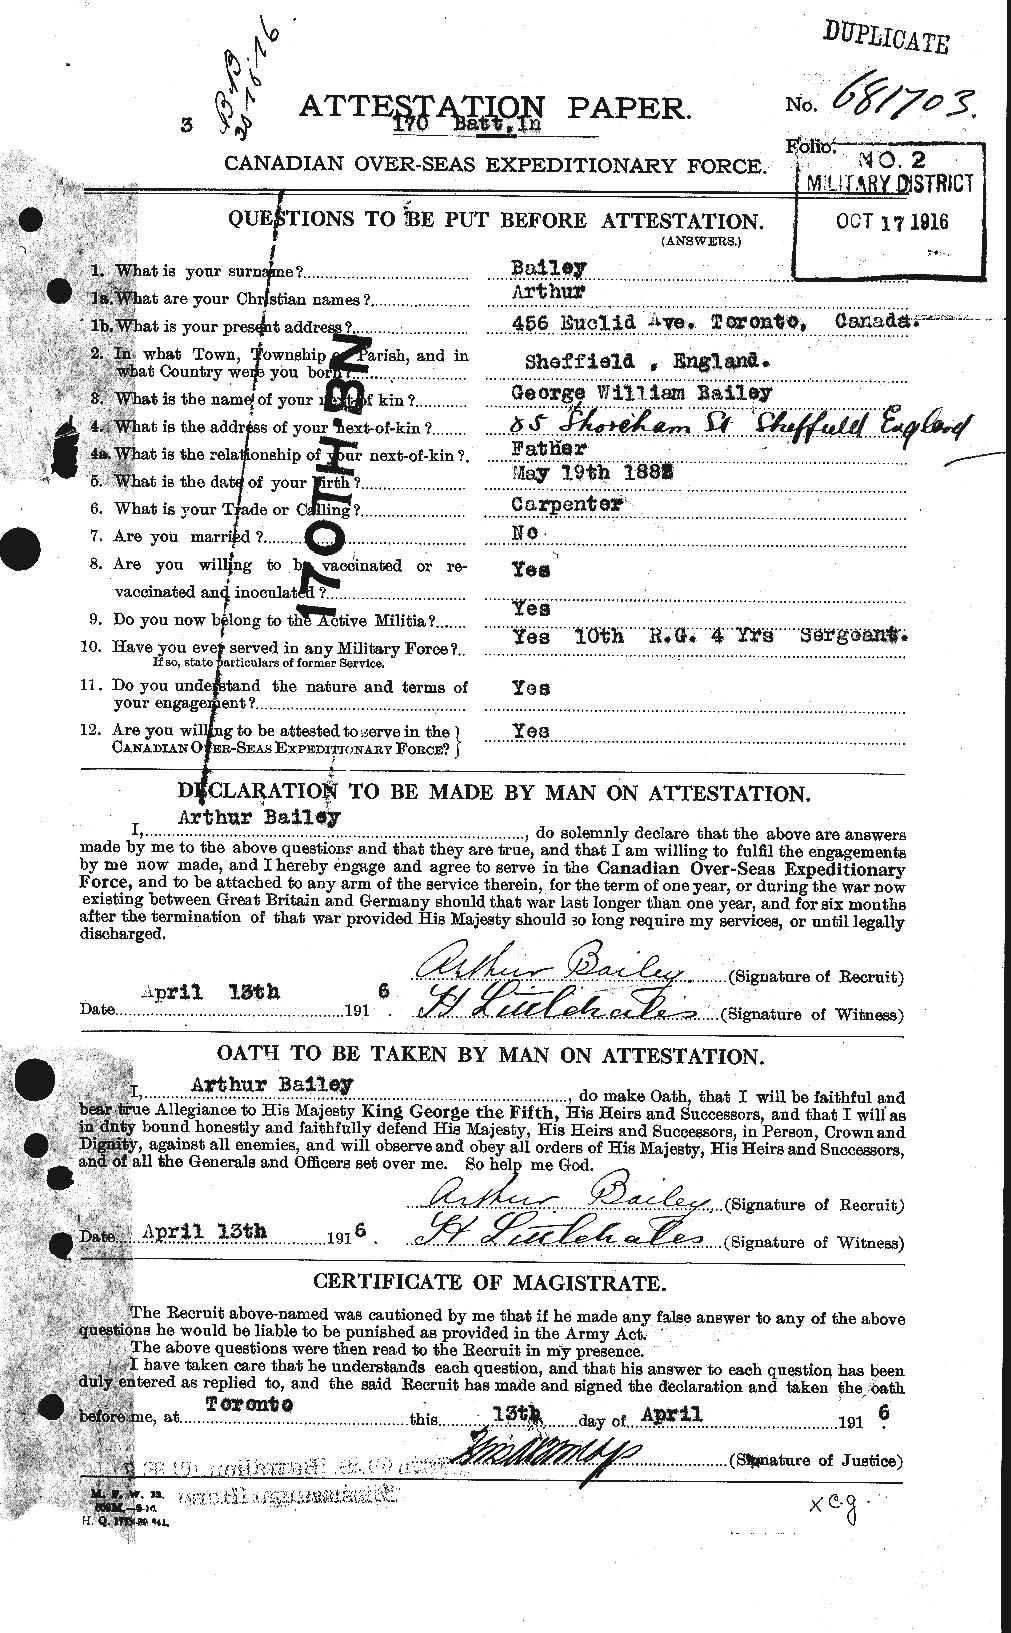 Personnel Records of the First World War - CEF 218418a